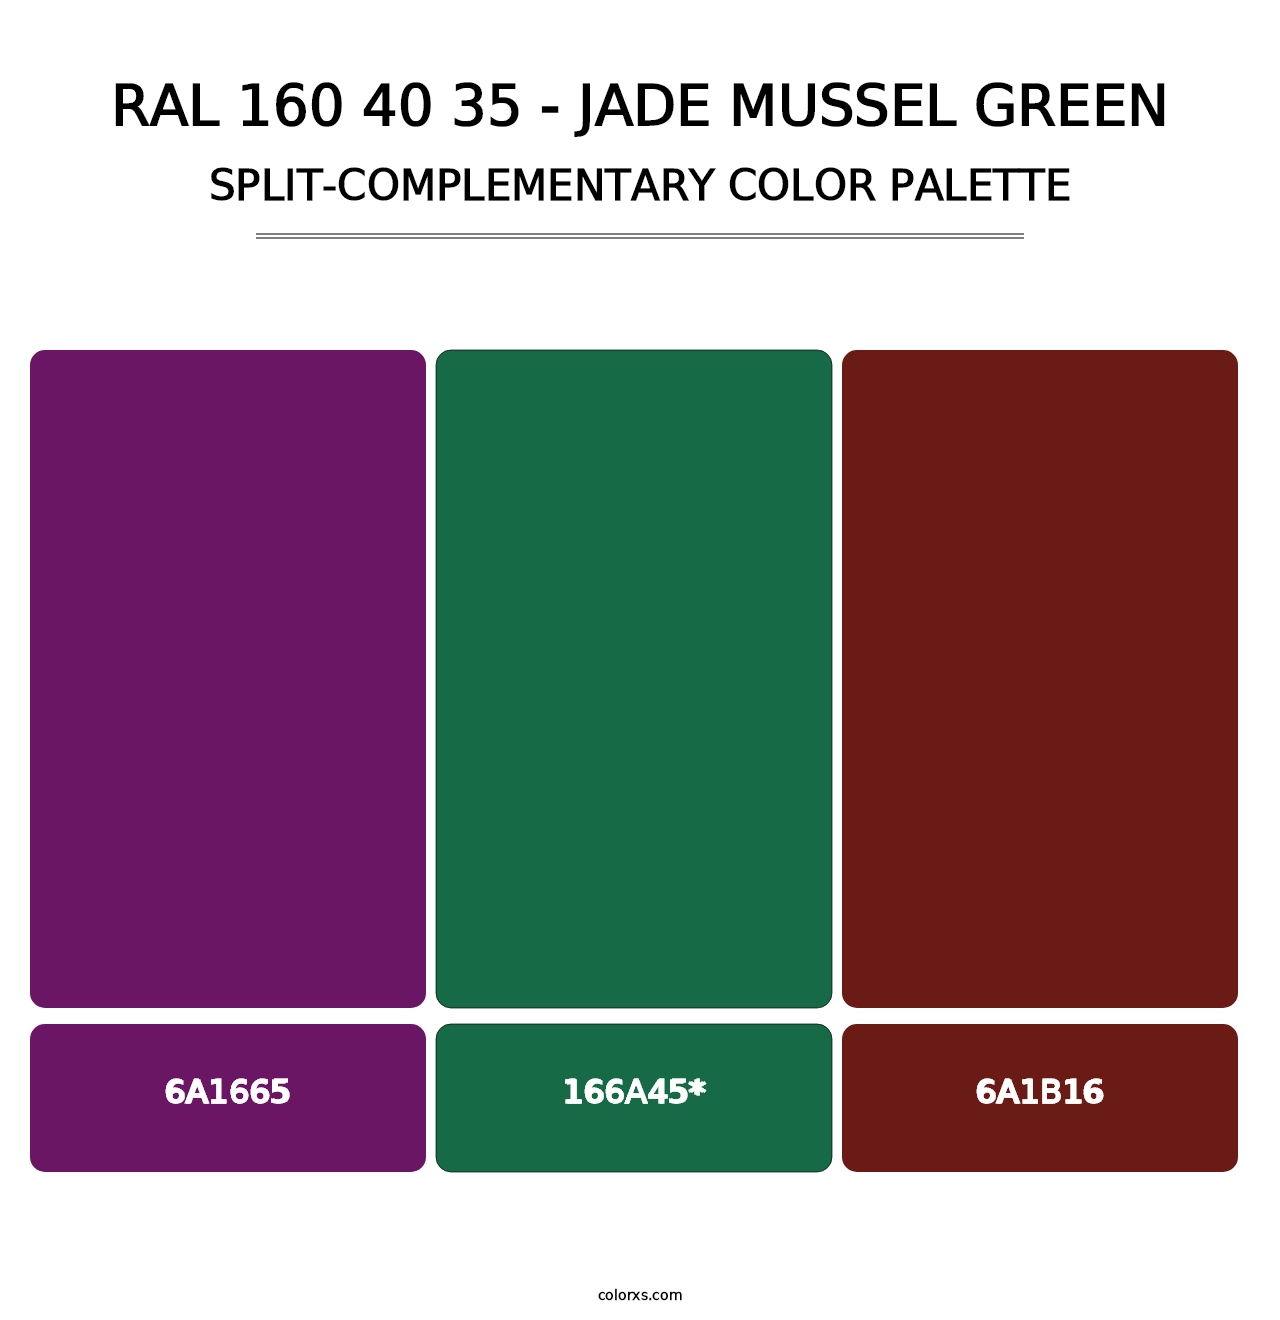 RAL 160 40 35 - Jade Mussel Green - Split-Complementary Color Palette